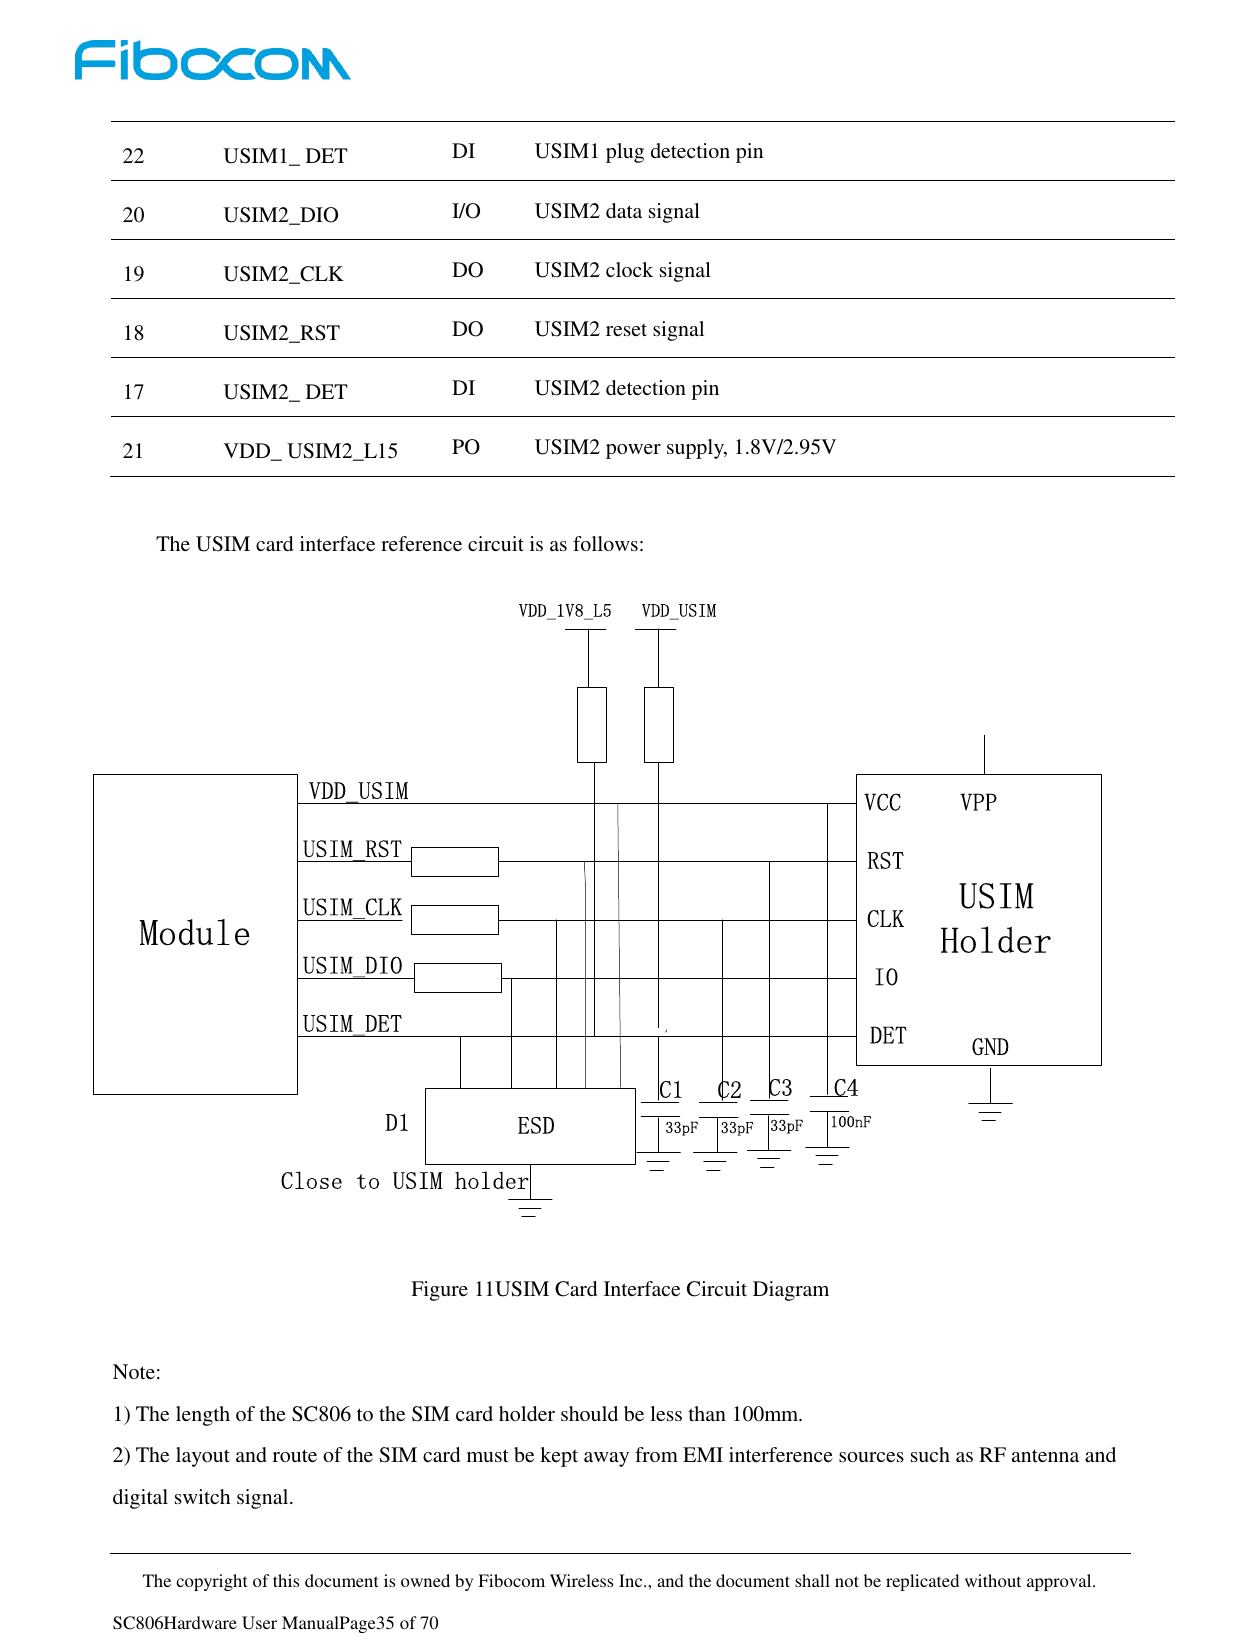     The copyright of this document is owned by Fibocom Wireless Inc., and the document shall not be replicated without approval.   SC806Hardware User ManualPage35 of 70 22 USIM1_ DET DI USIM1 plug detection pin  20 USIM2_DIO I/O USIM2 data signal  19 USIM2_CLK DO USIM2 clock signal  18 USIM2_RST DO USIM2 reset signal  17 USIM2_ DET DI USIM2 detection pin  21 VDD_ USIM2_L15 PO USIM2 power supply, 1.8V/2.95V   The USIM card interface reference circuit is as follows:  Figure 11USIM Card Interface Circuit Diagram  Note: 1) The length of the SC806 to the SIM card holder should be less than 100mm. 2) The layout and route of the SIM card must be kept away from EMI interference sources such as RF antenna and digital switch signal. ModuleVDD_USIMUSIM_RSTUSIM_CLKUSIM_DETUSIM_DIOVCCRSTCLKIOVPPGNDDETC133pF`C233pFC333pF 100nFC4VDD_1V8_L5 VDD_USIMD1 ESDClose to USIM holderUSIM Holder